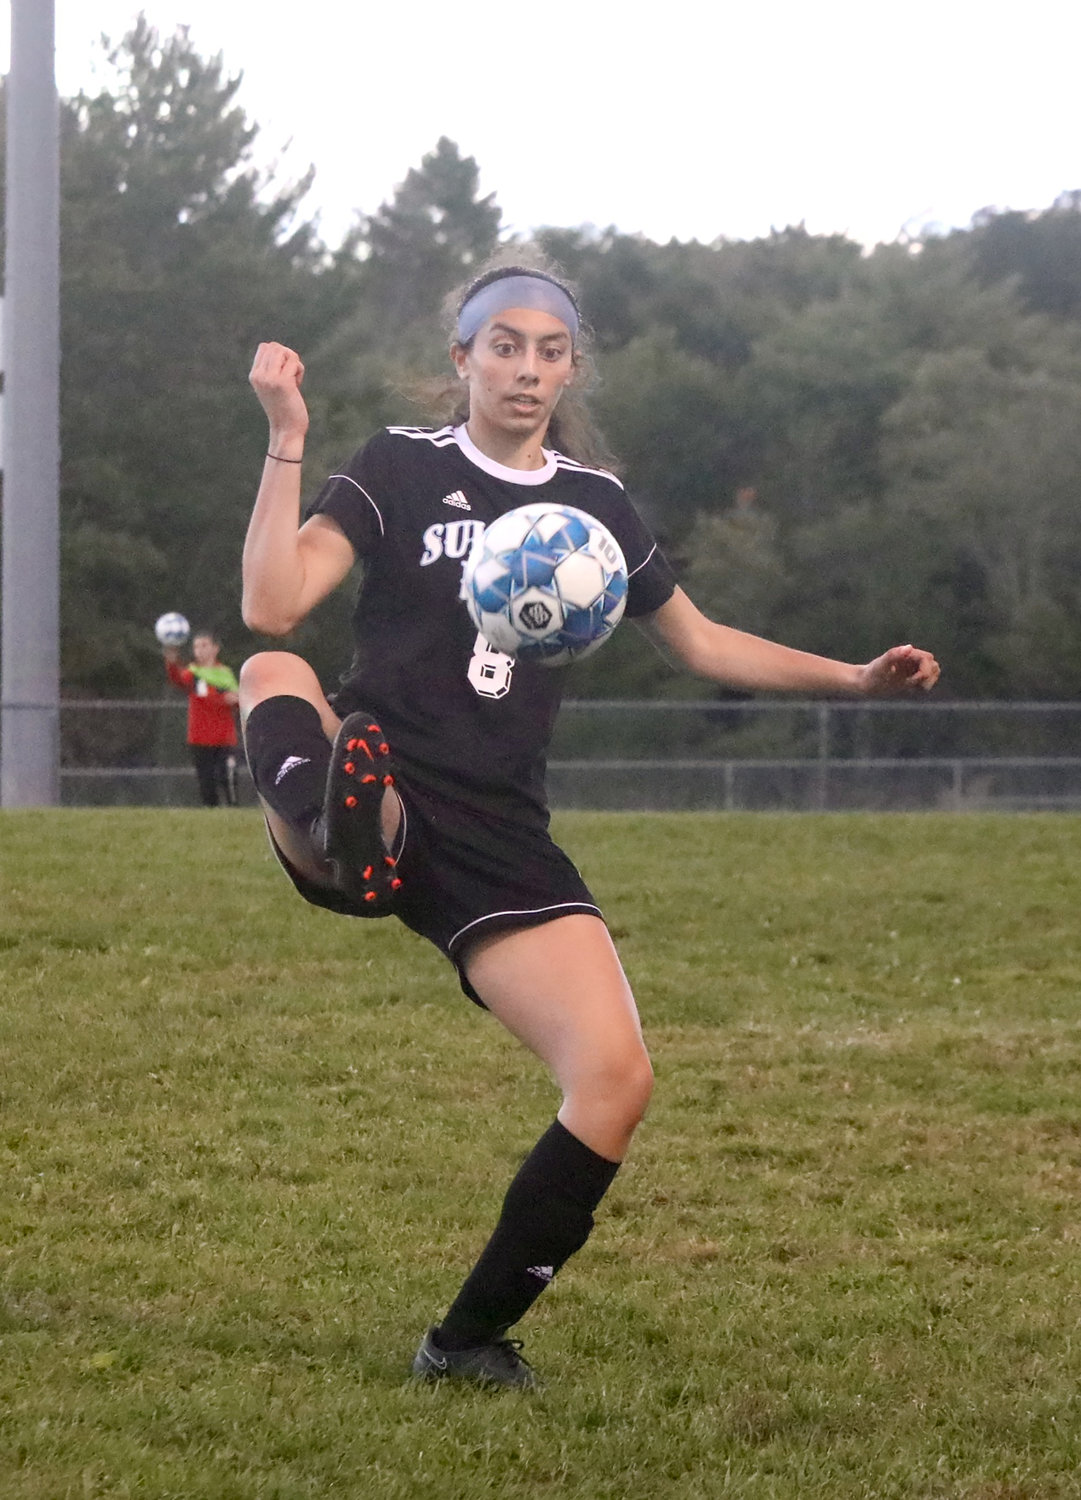 Sullivan West talented junior Viola Shami shows great footwork as she maneuvers the ball.